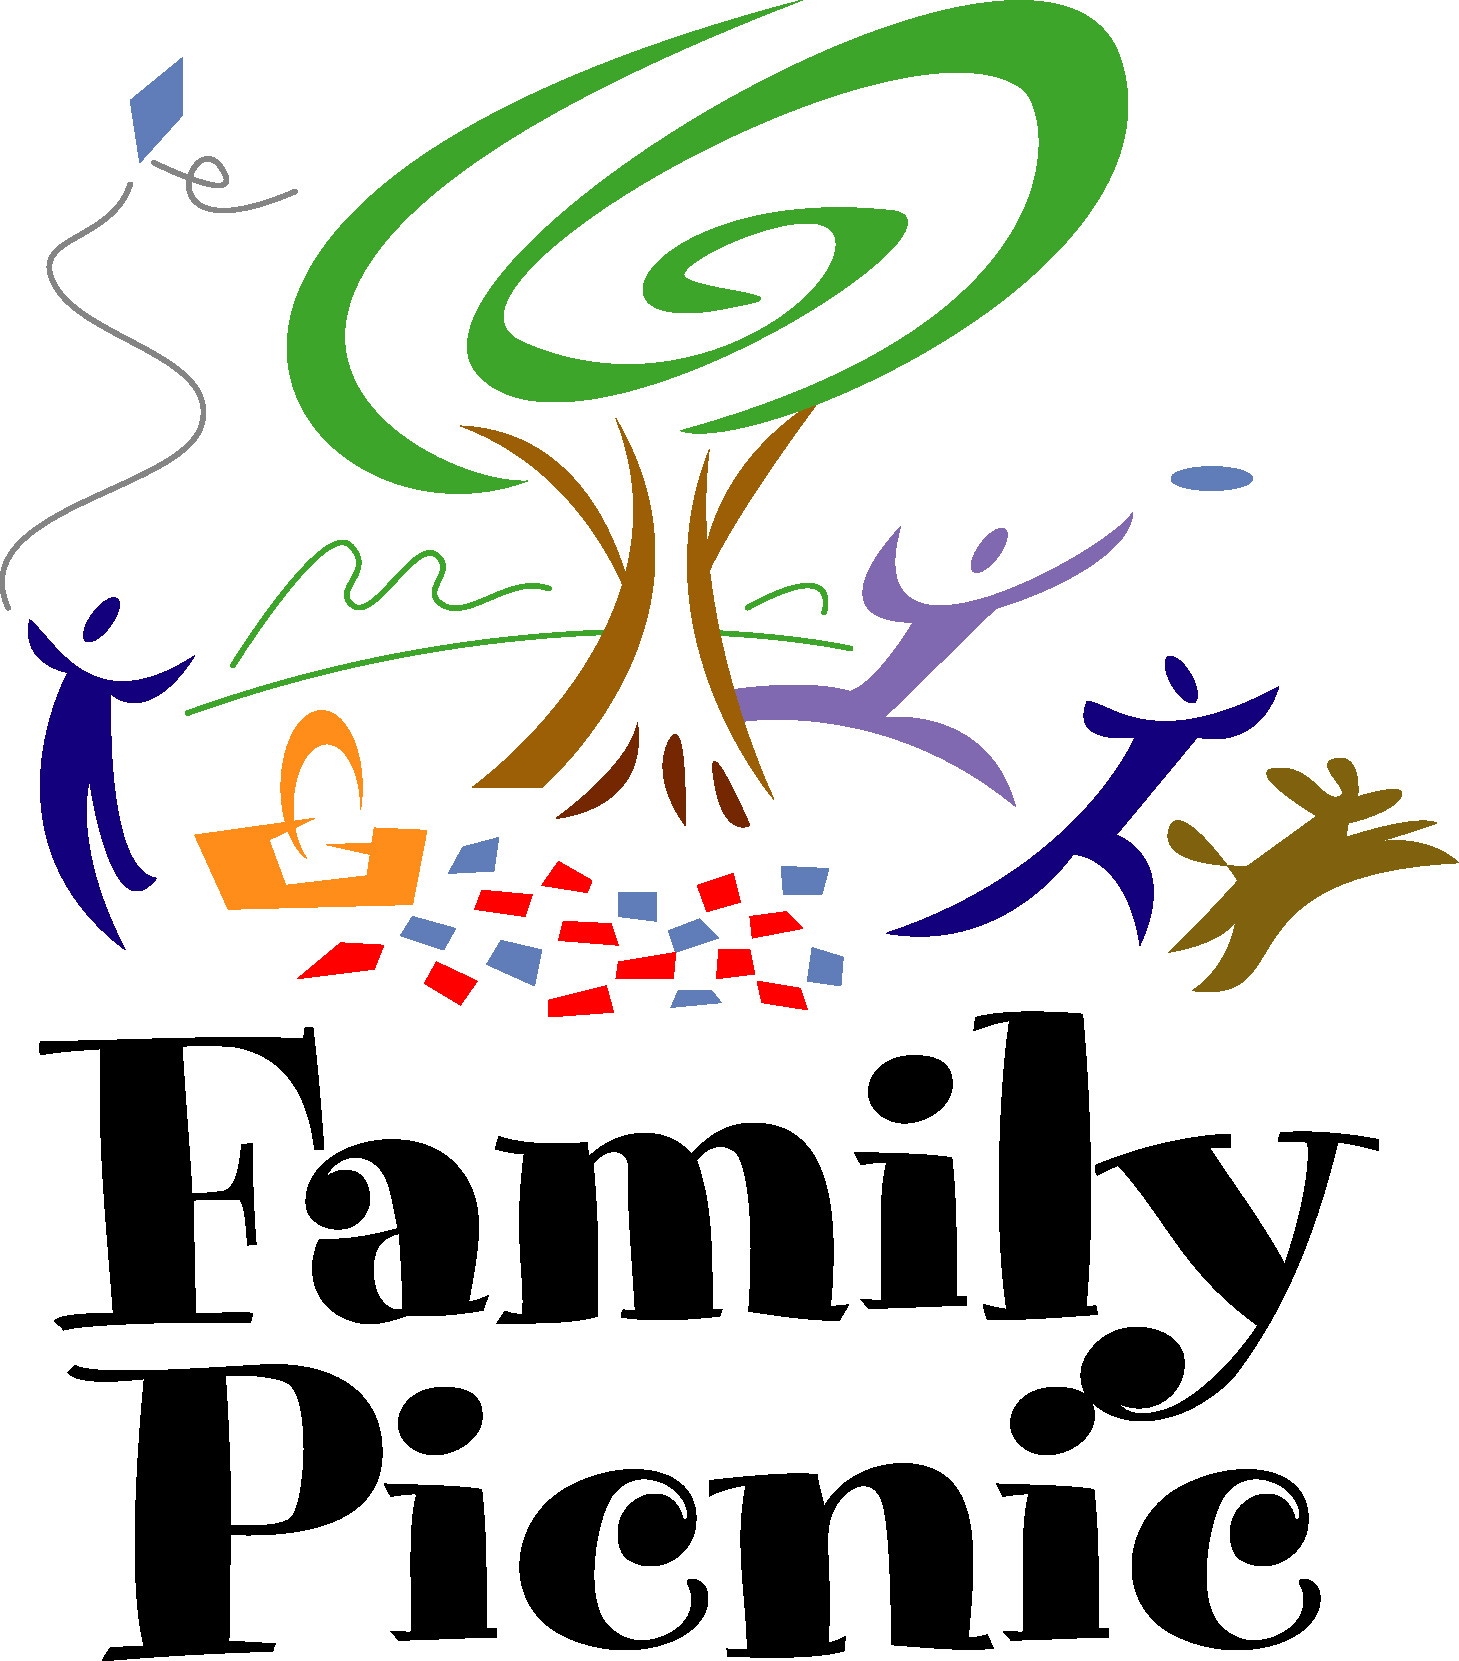 Picnic clip art free | Clipart library - Free Clipart Images